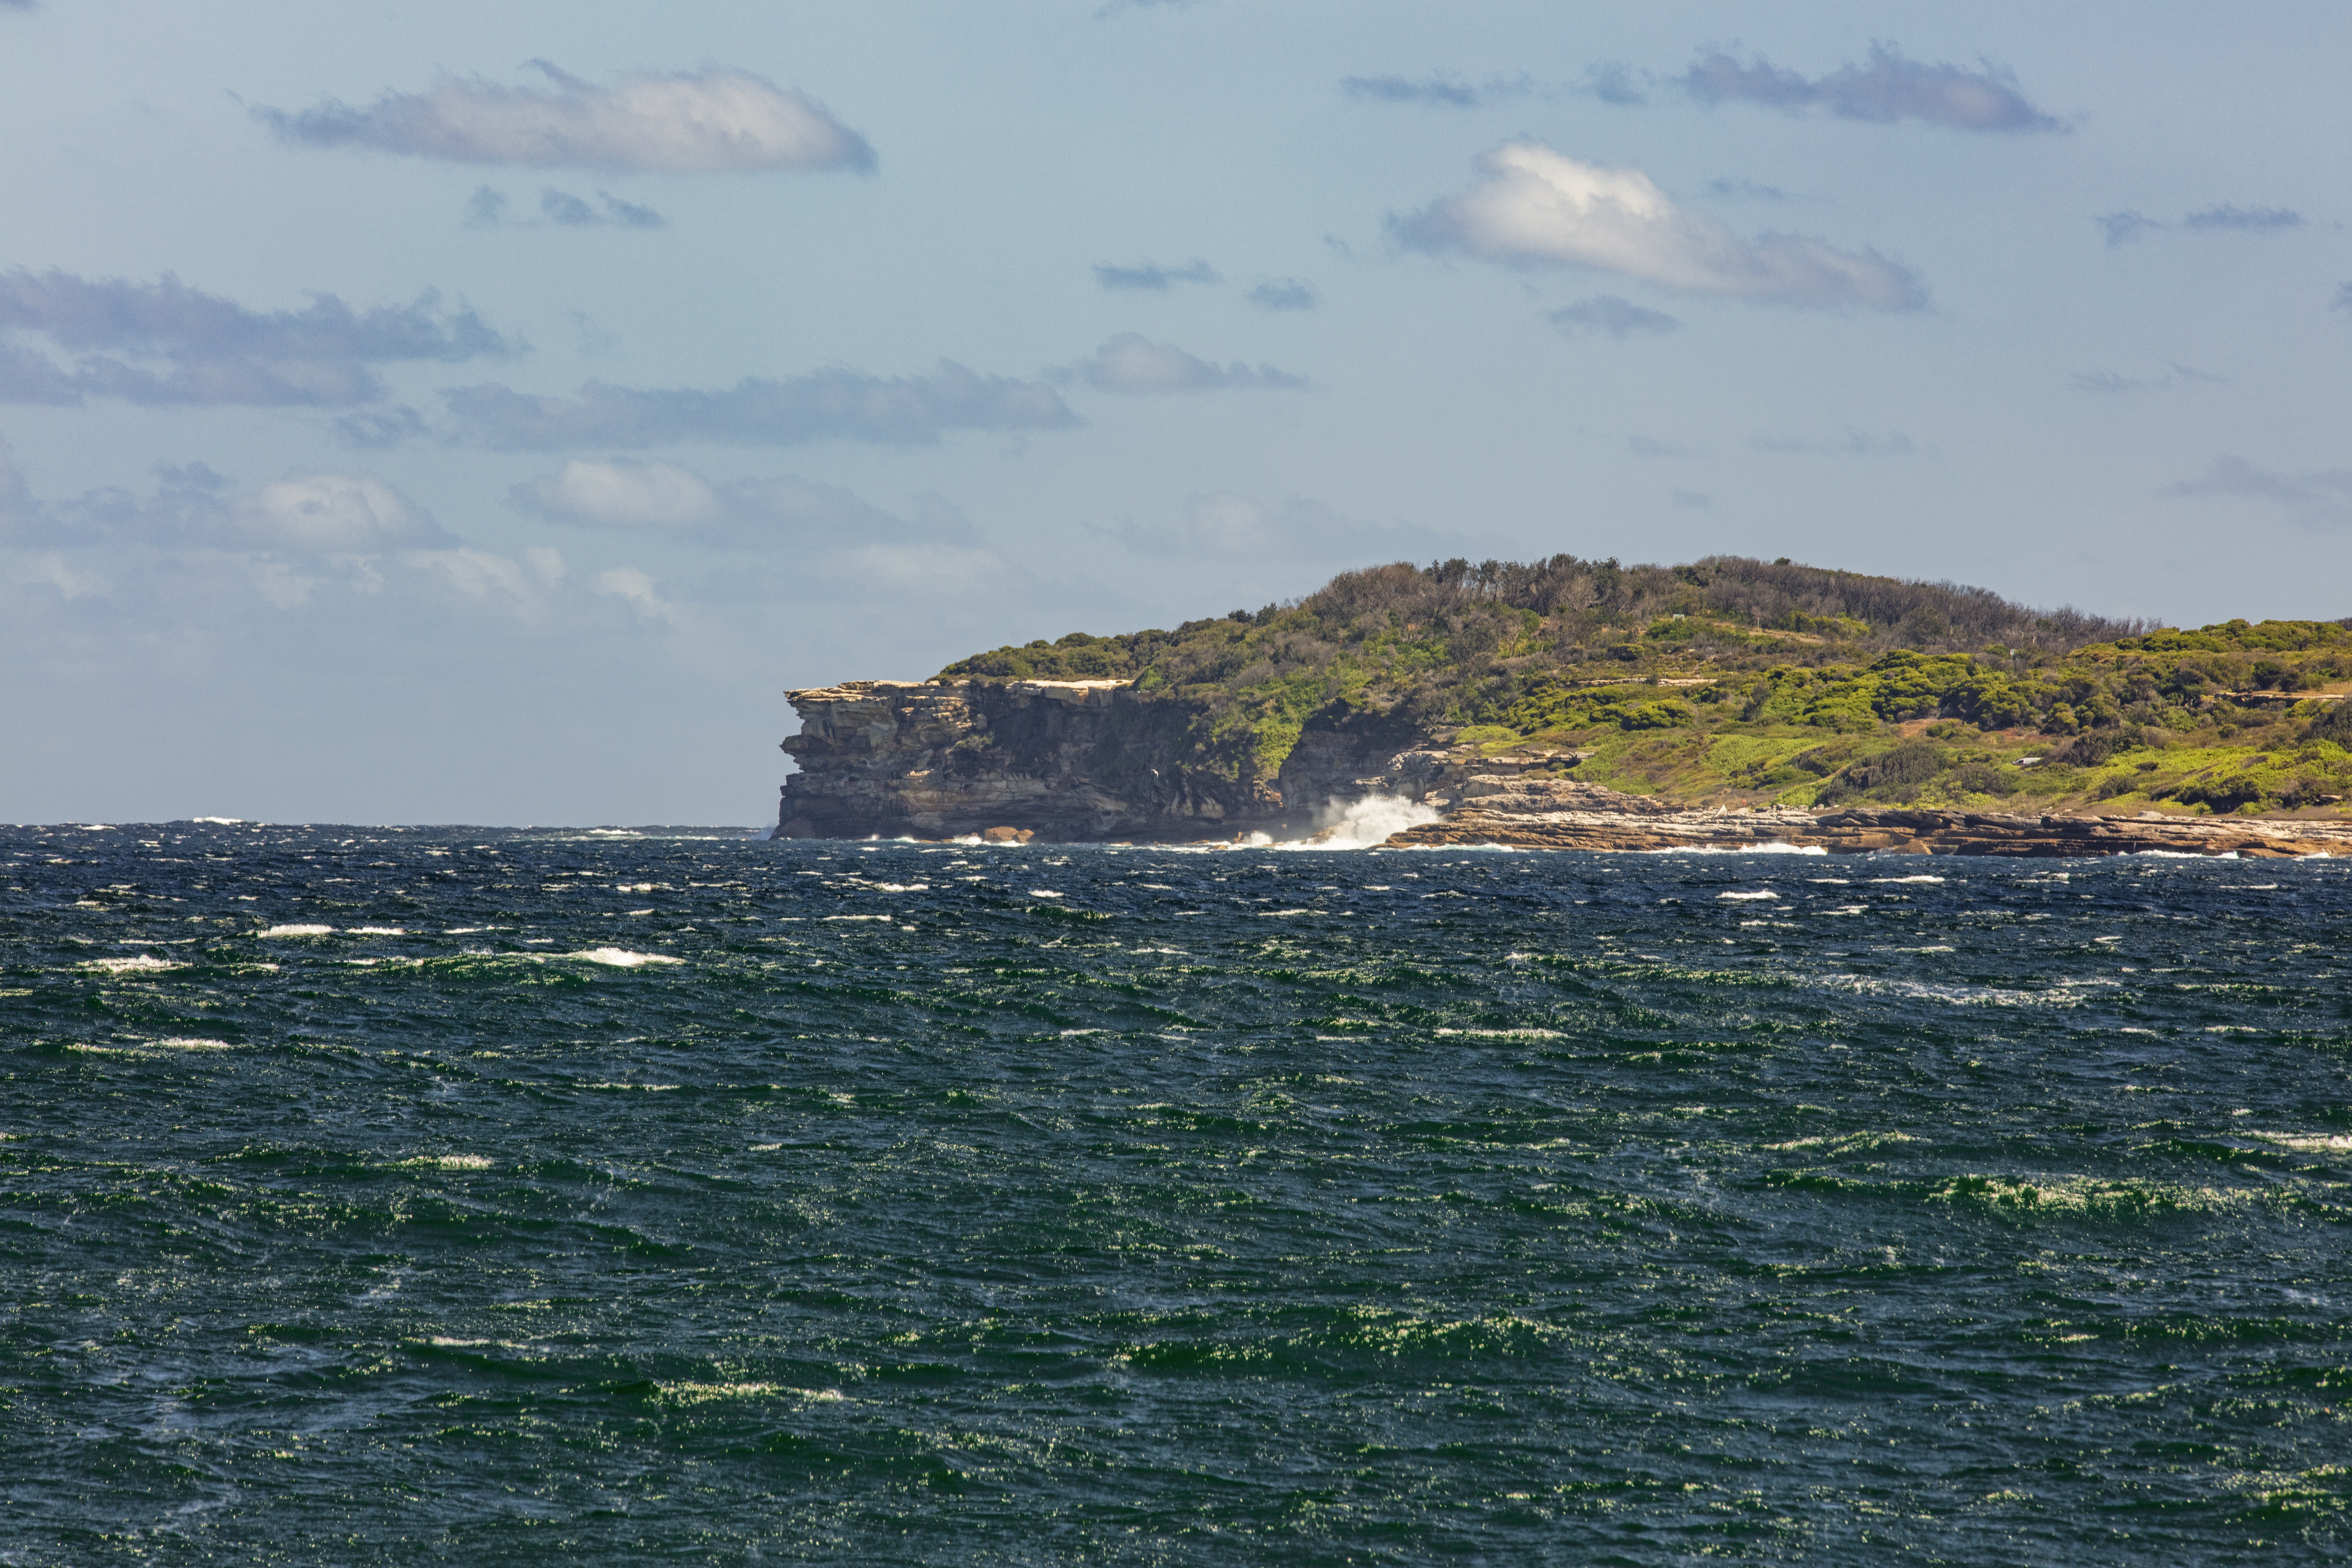 South Head as viewed from Bare Island Fort, Botany Bay, 2019